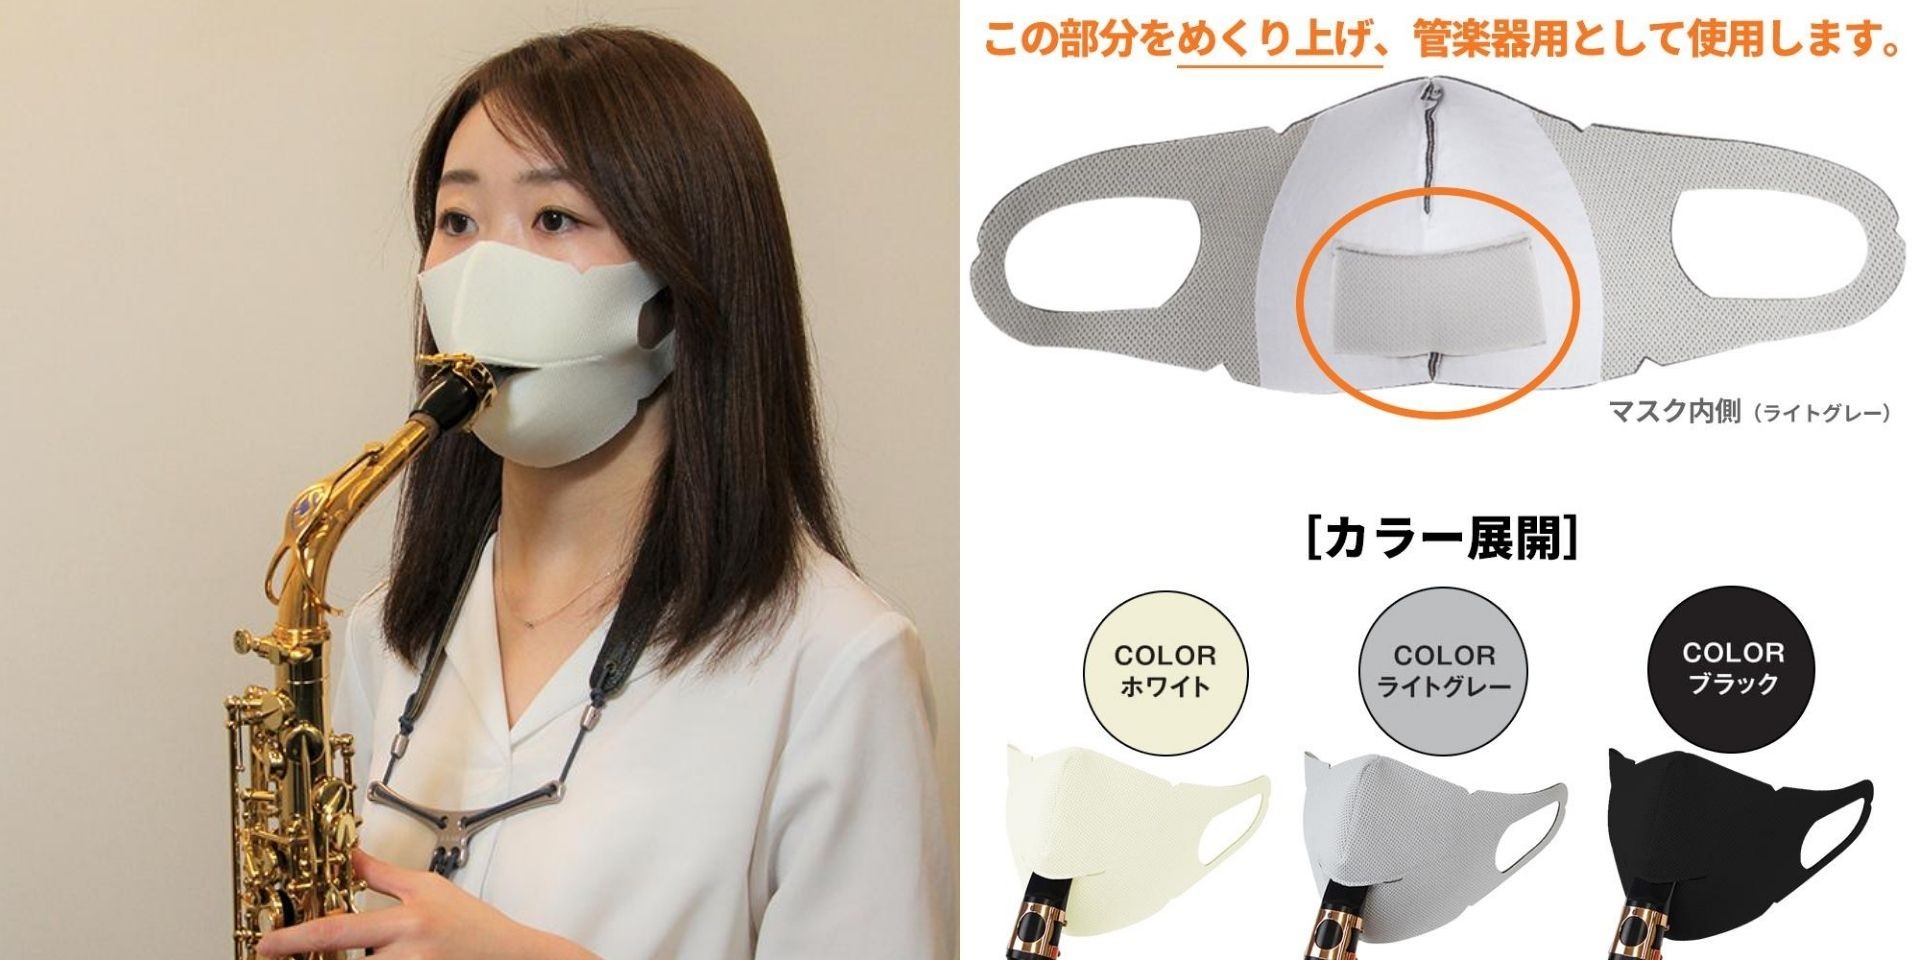 Musicians can now play wind instruments with this innovative mask designed in Japan 